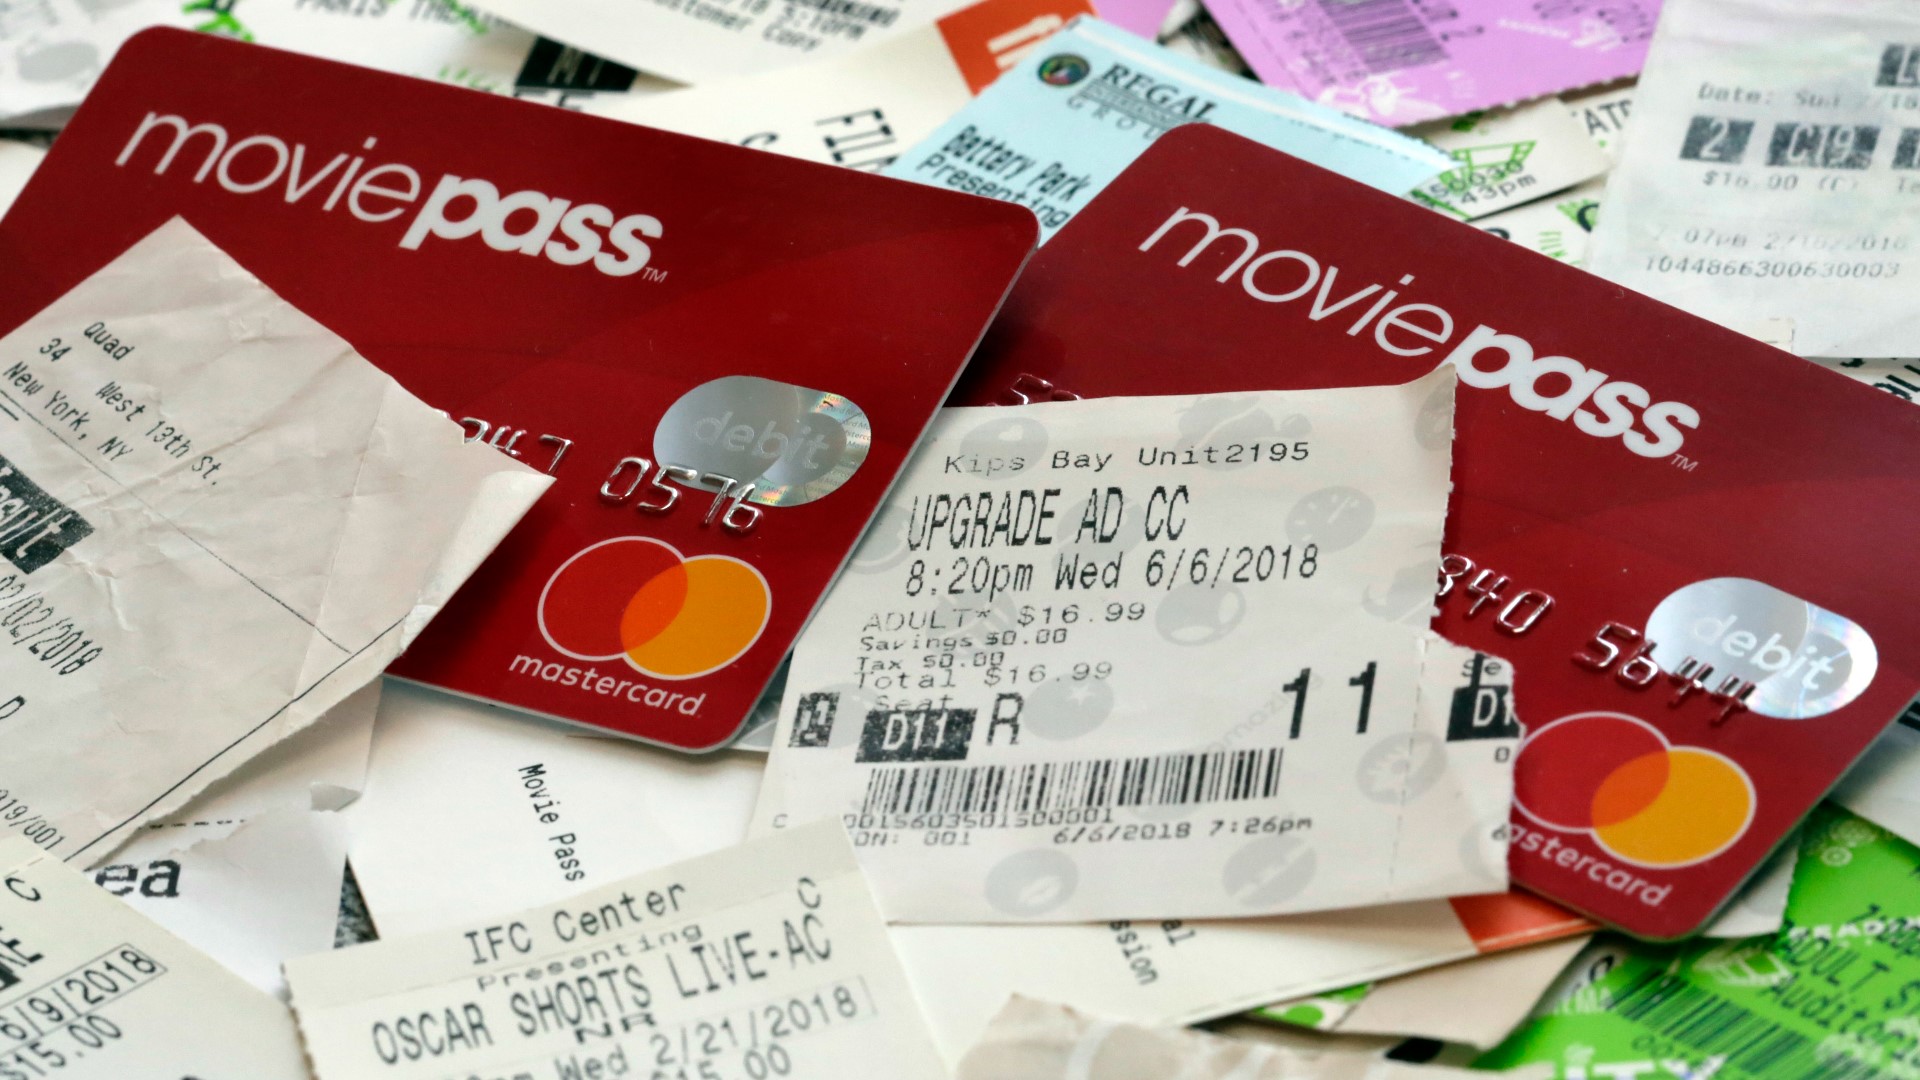 Gone are the MoviePass days where you could see as many movies in theaters as you wanted for $10 per month. But a new version of the company is relaunching soon.